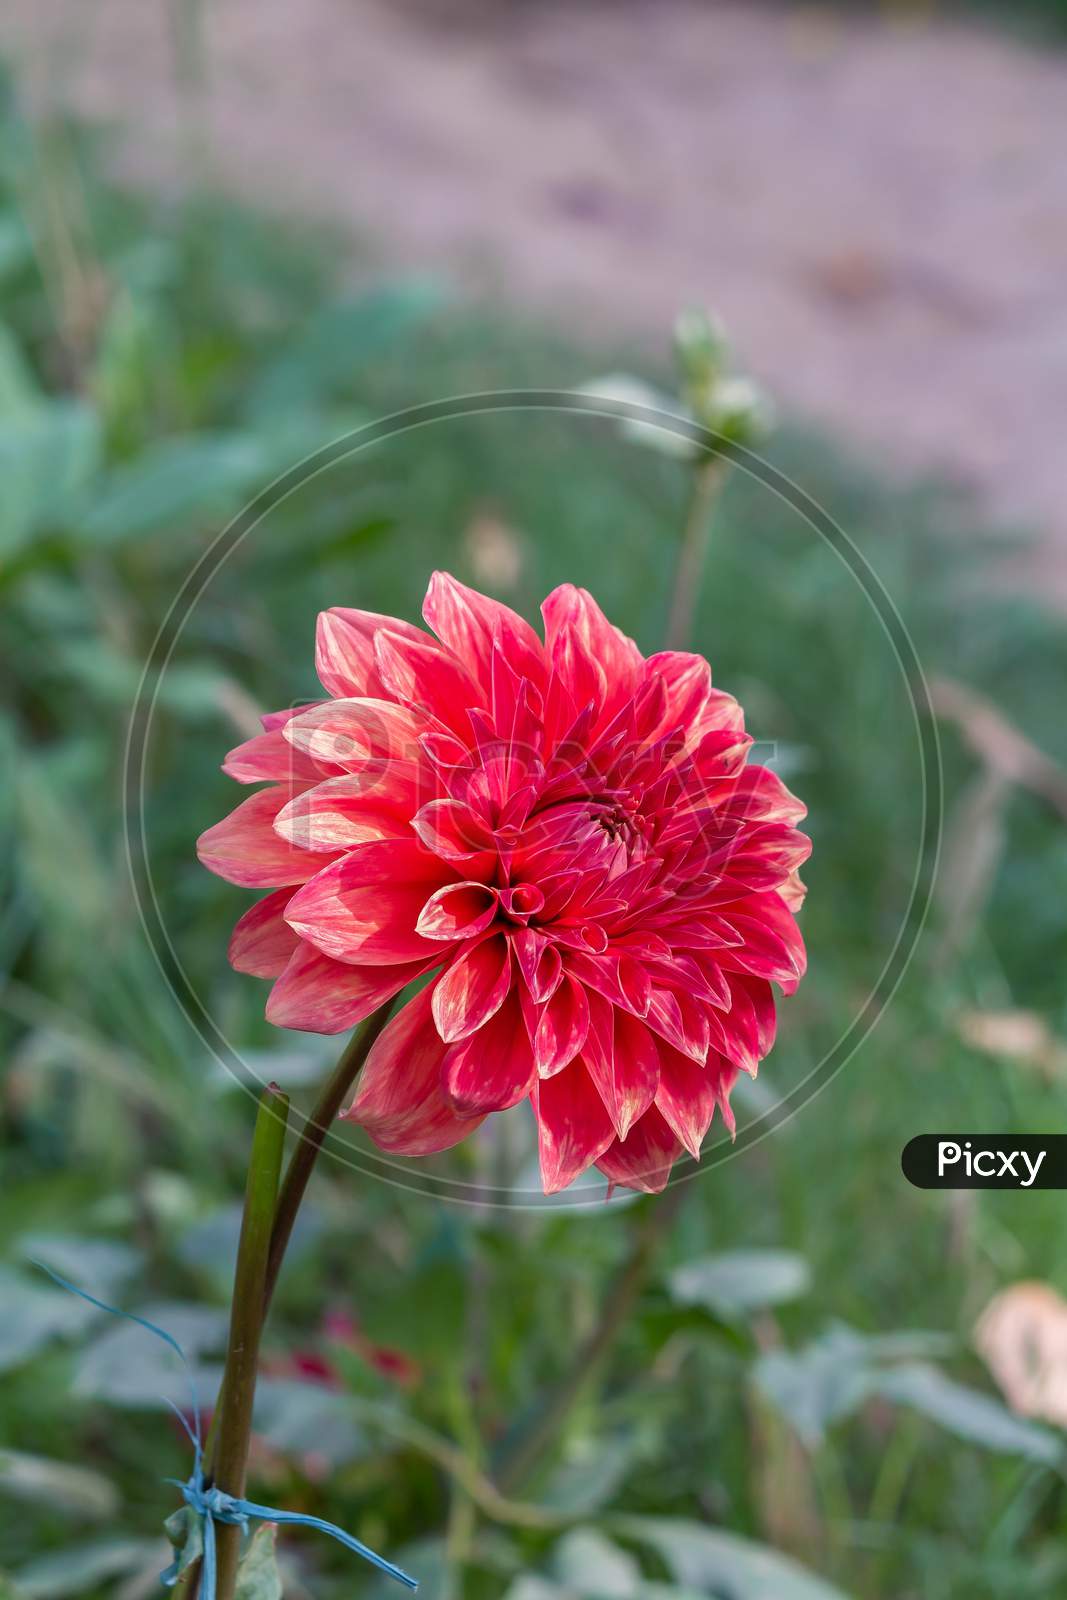 Top Angle View Of Red Daisy Flower In The Park Over Green Blur Garden Background In Vertical Frame